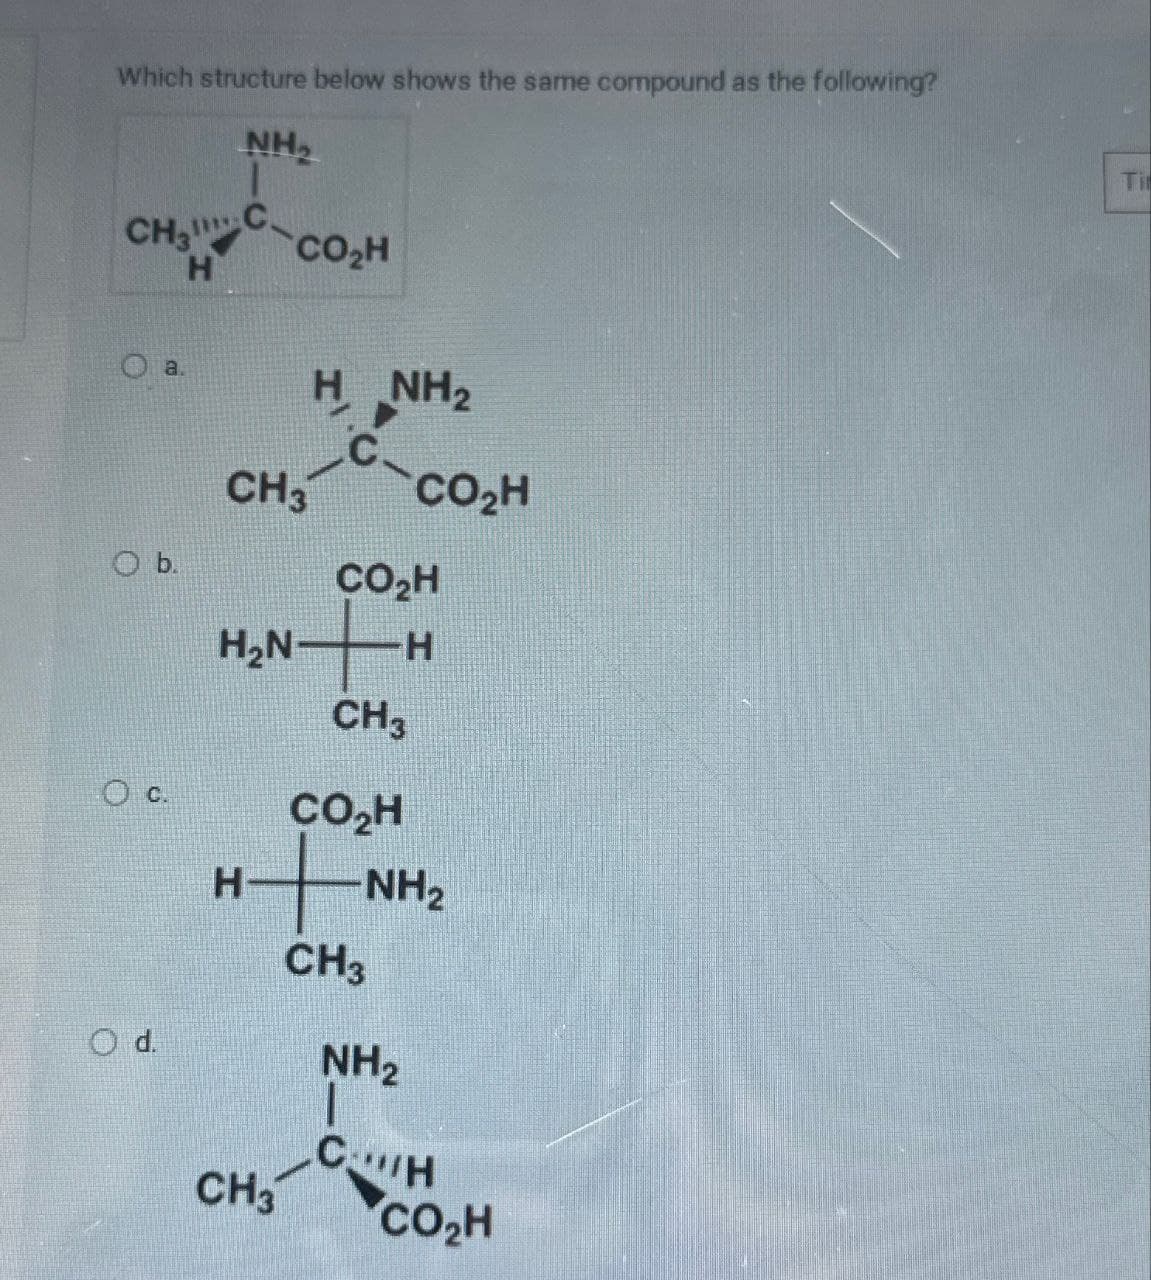 Which structure below shows the same compound as the following?
NH₂
CH₂
CO₂H
H
HNH,
C
CH3
CO₂H
b.
CO₂H
H₂N H
CH3
Oc.
CO₂H
H
-NH2
CH3
NH2
CH
CH3
CO₂H
Ti